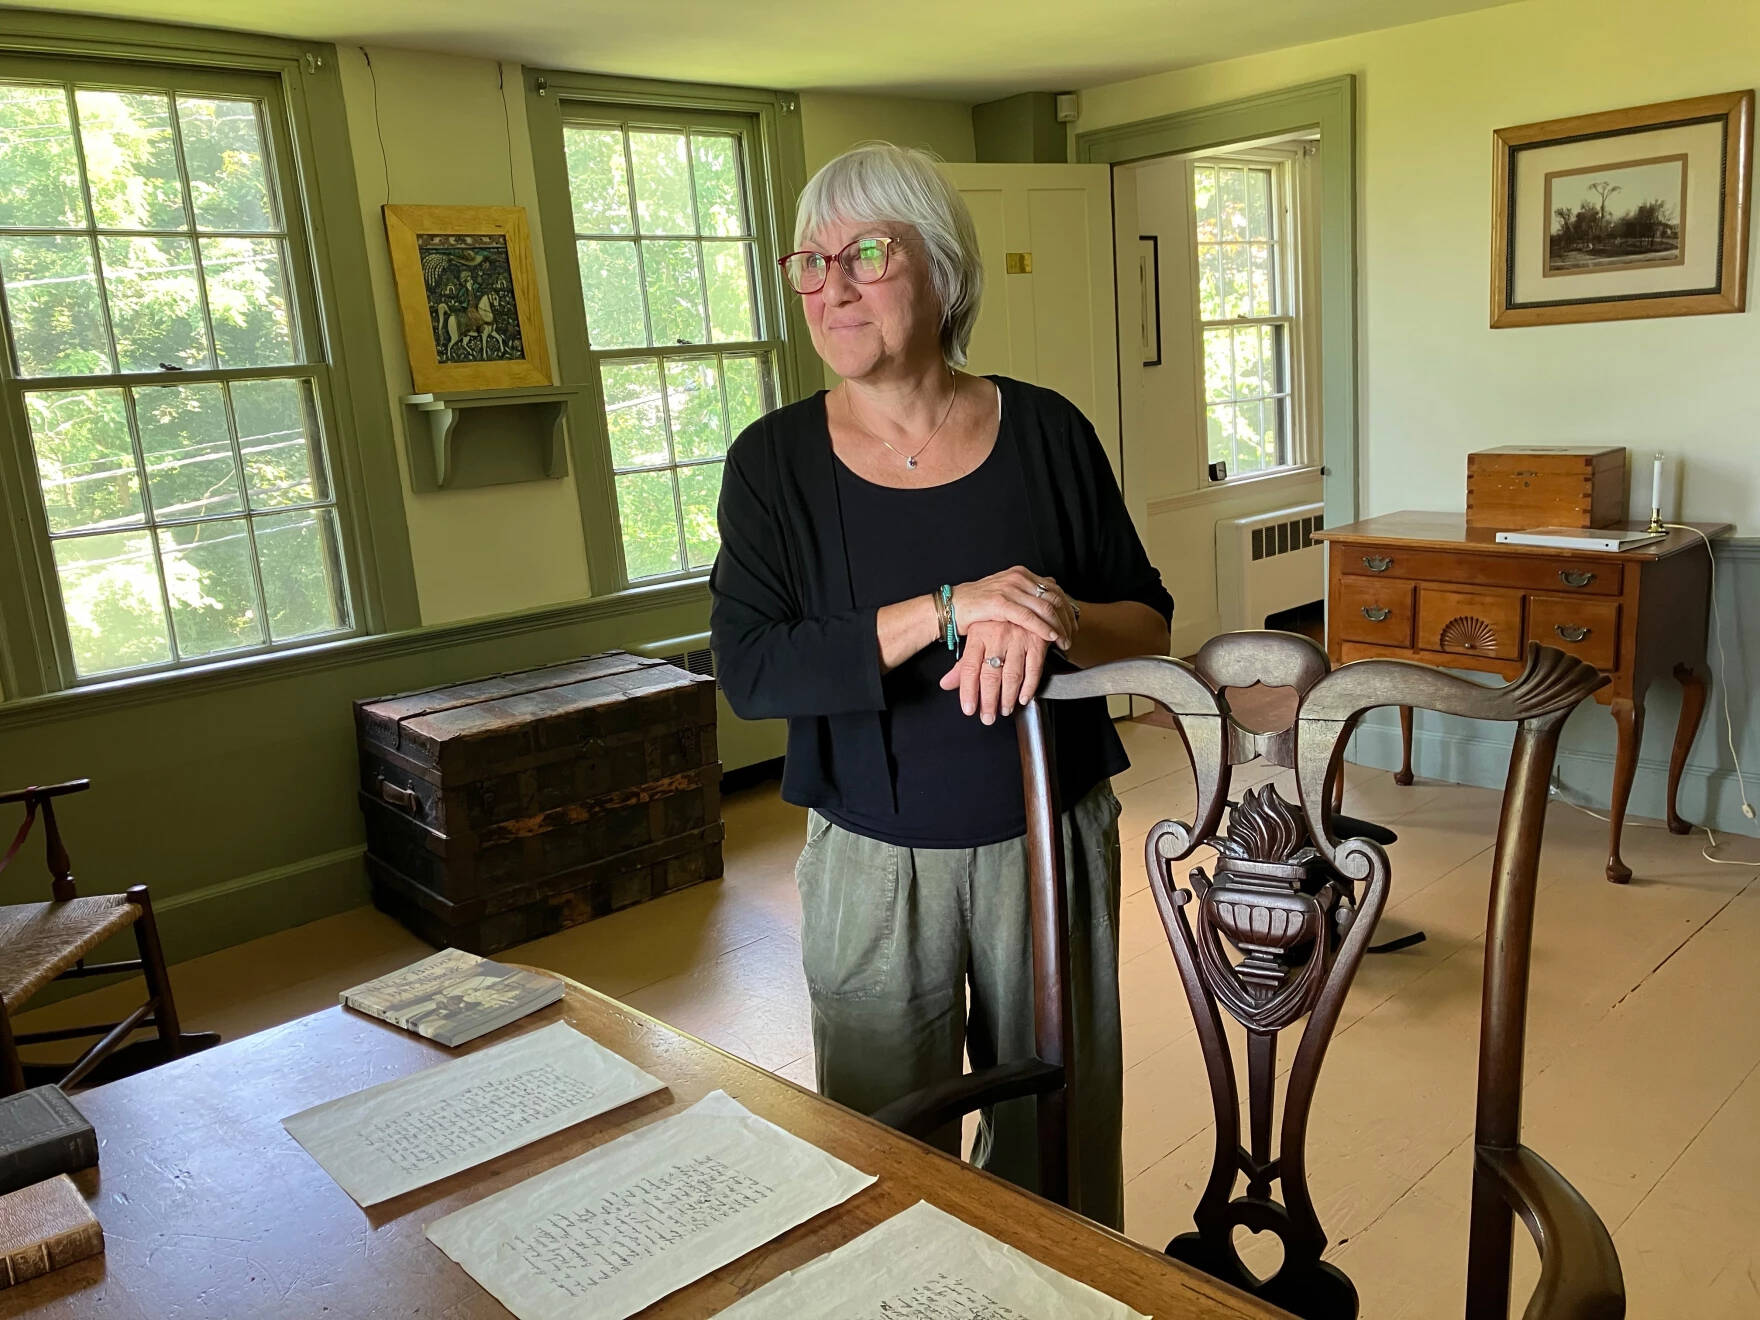 Jana Laiz stands next to a replica of Herman Melville's desk in what was once his study in Arrowhead, in Pittsfield, Massachusetts. (Nancy Eve Cohen/NEPM)